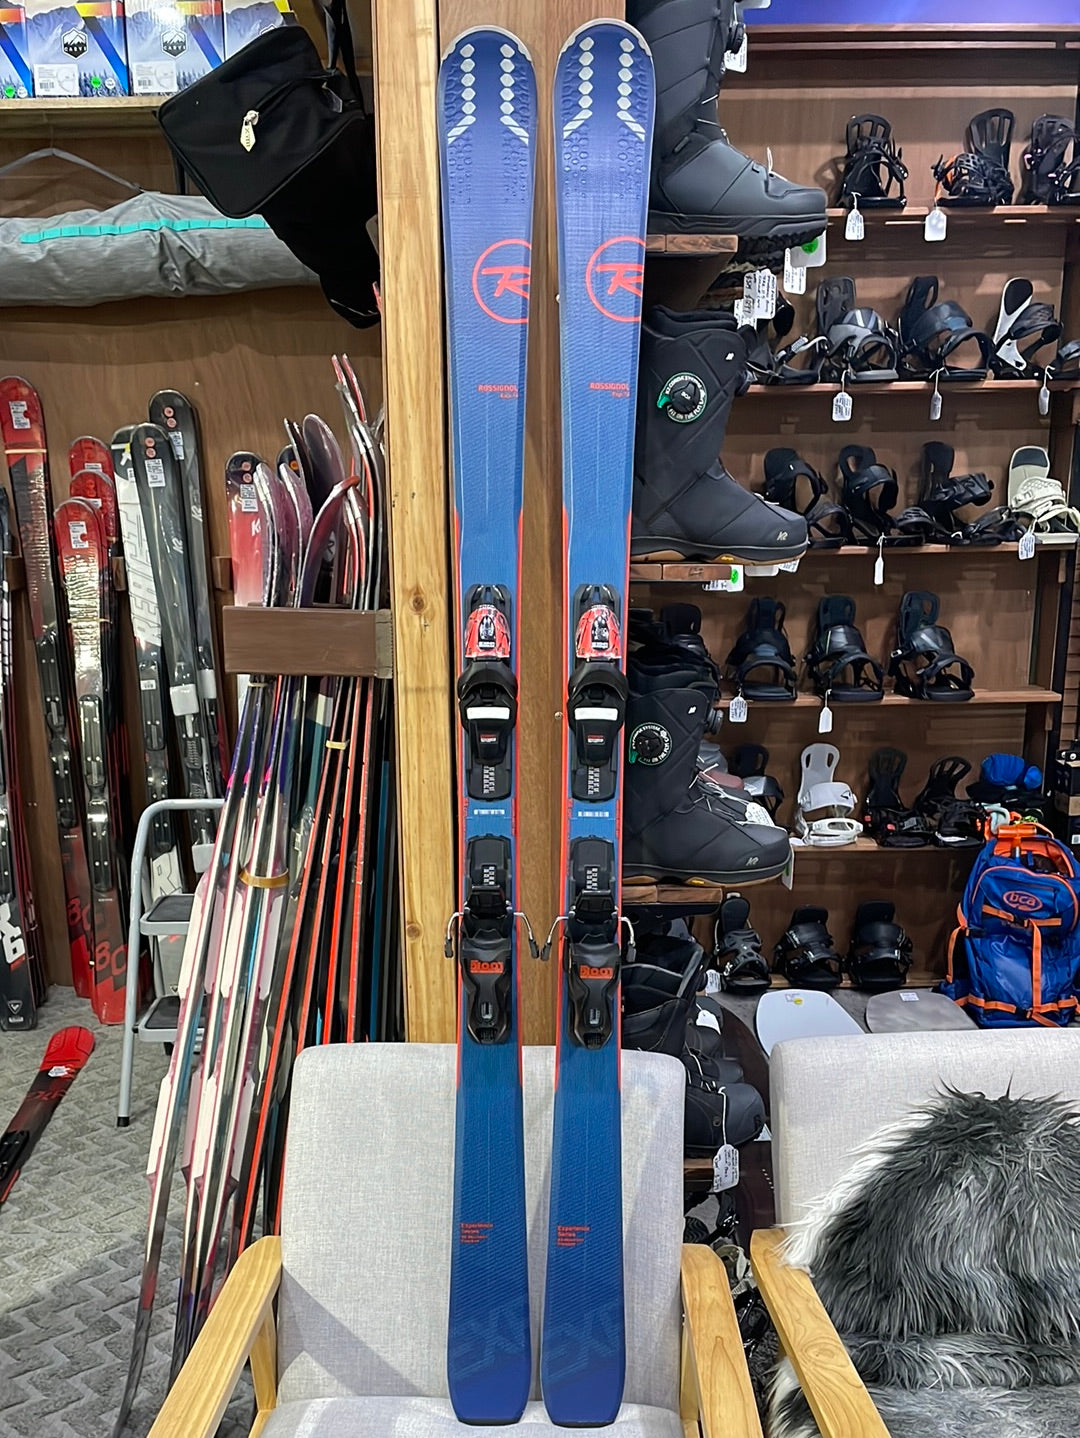 Skis Rossignol All Mountain Skis Experience 74 - Bindings